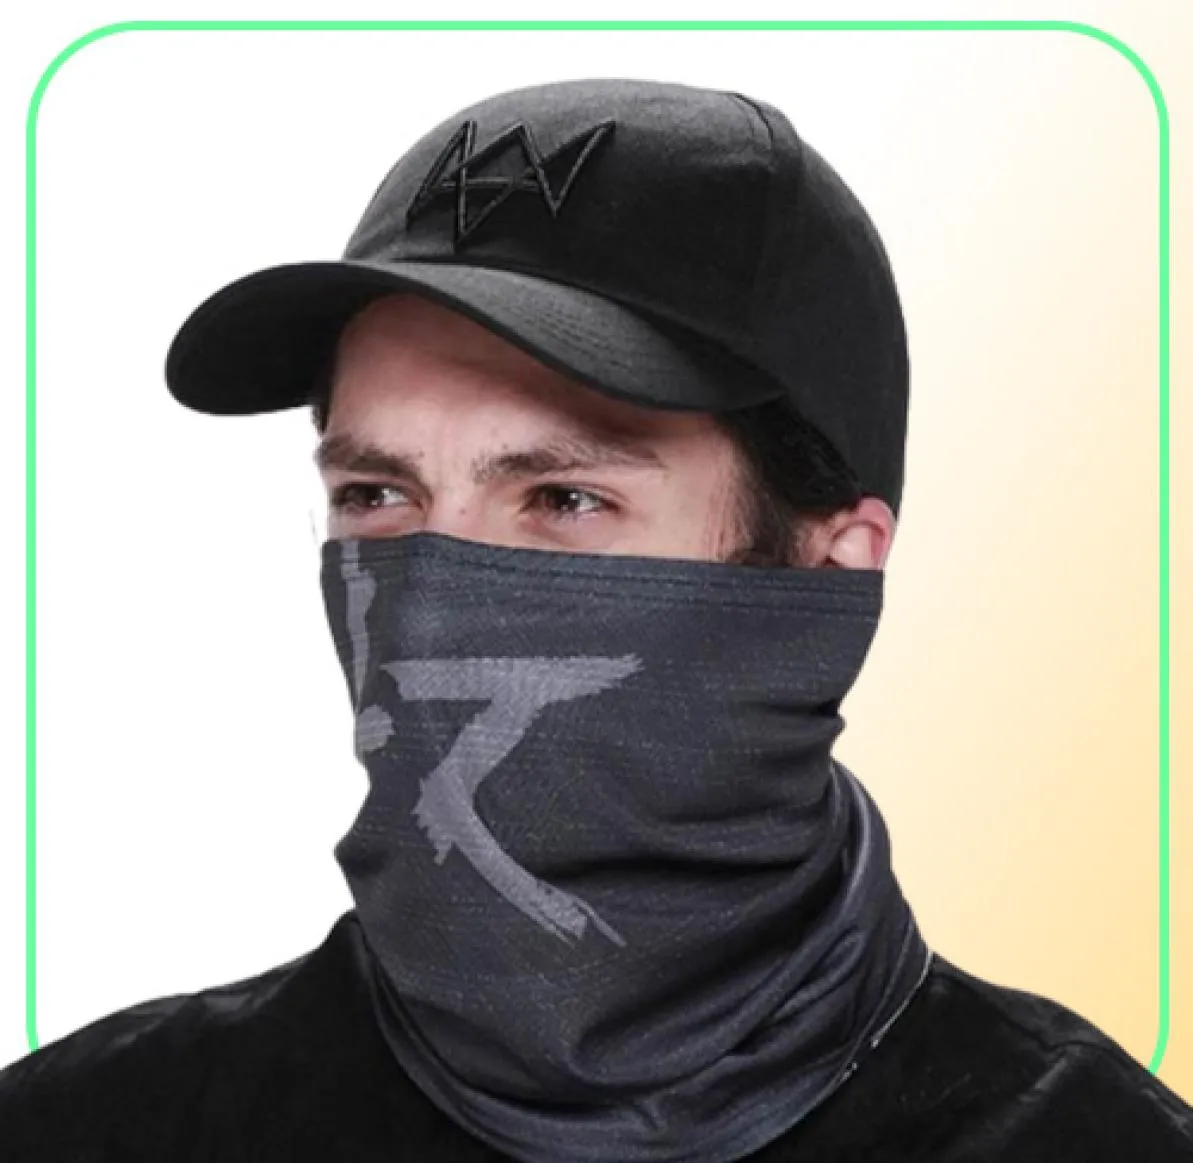 2020 Watch Dogs Mask Cotton Costume Cosplay Aiden Pearce Face Mask262N249h6805499